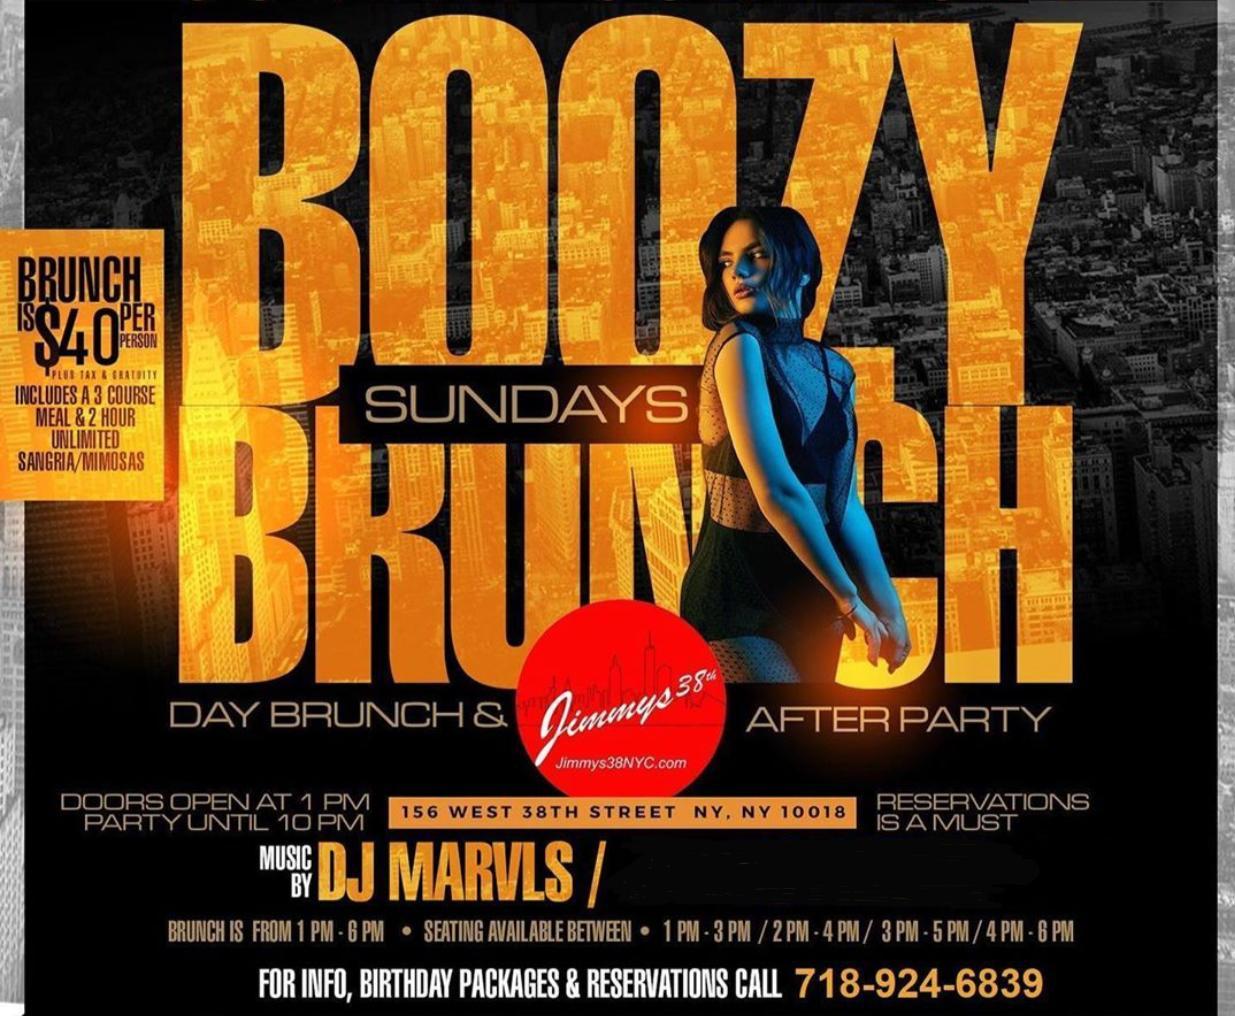 Boozy Brunch Sundays and Day Party at Jimmy's 38th